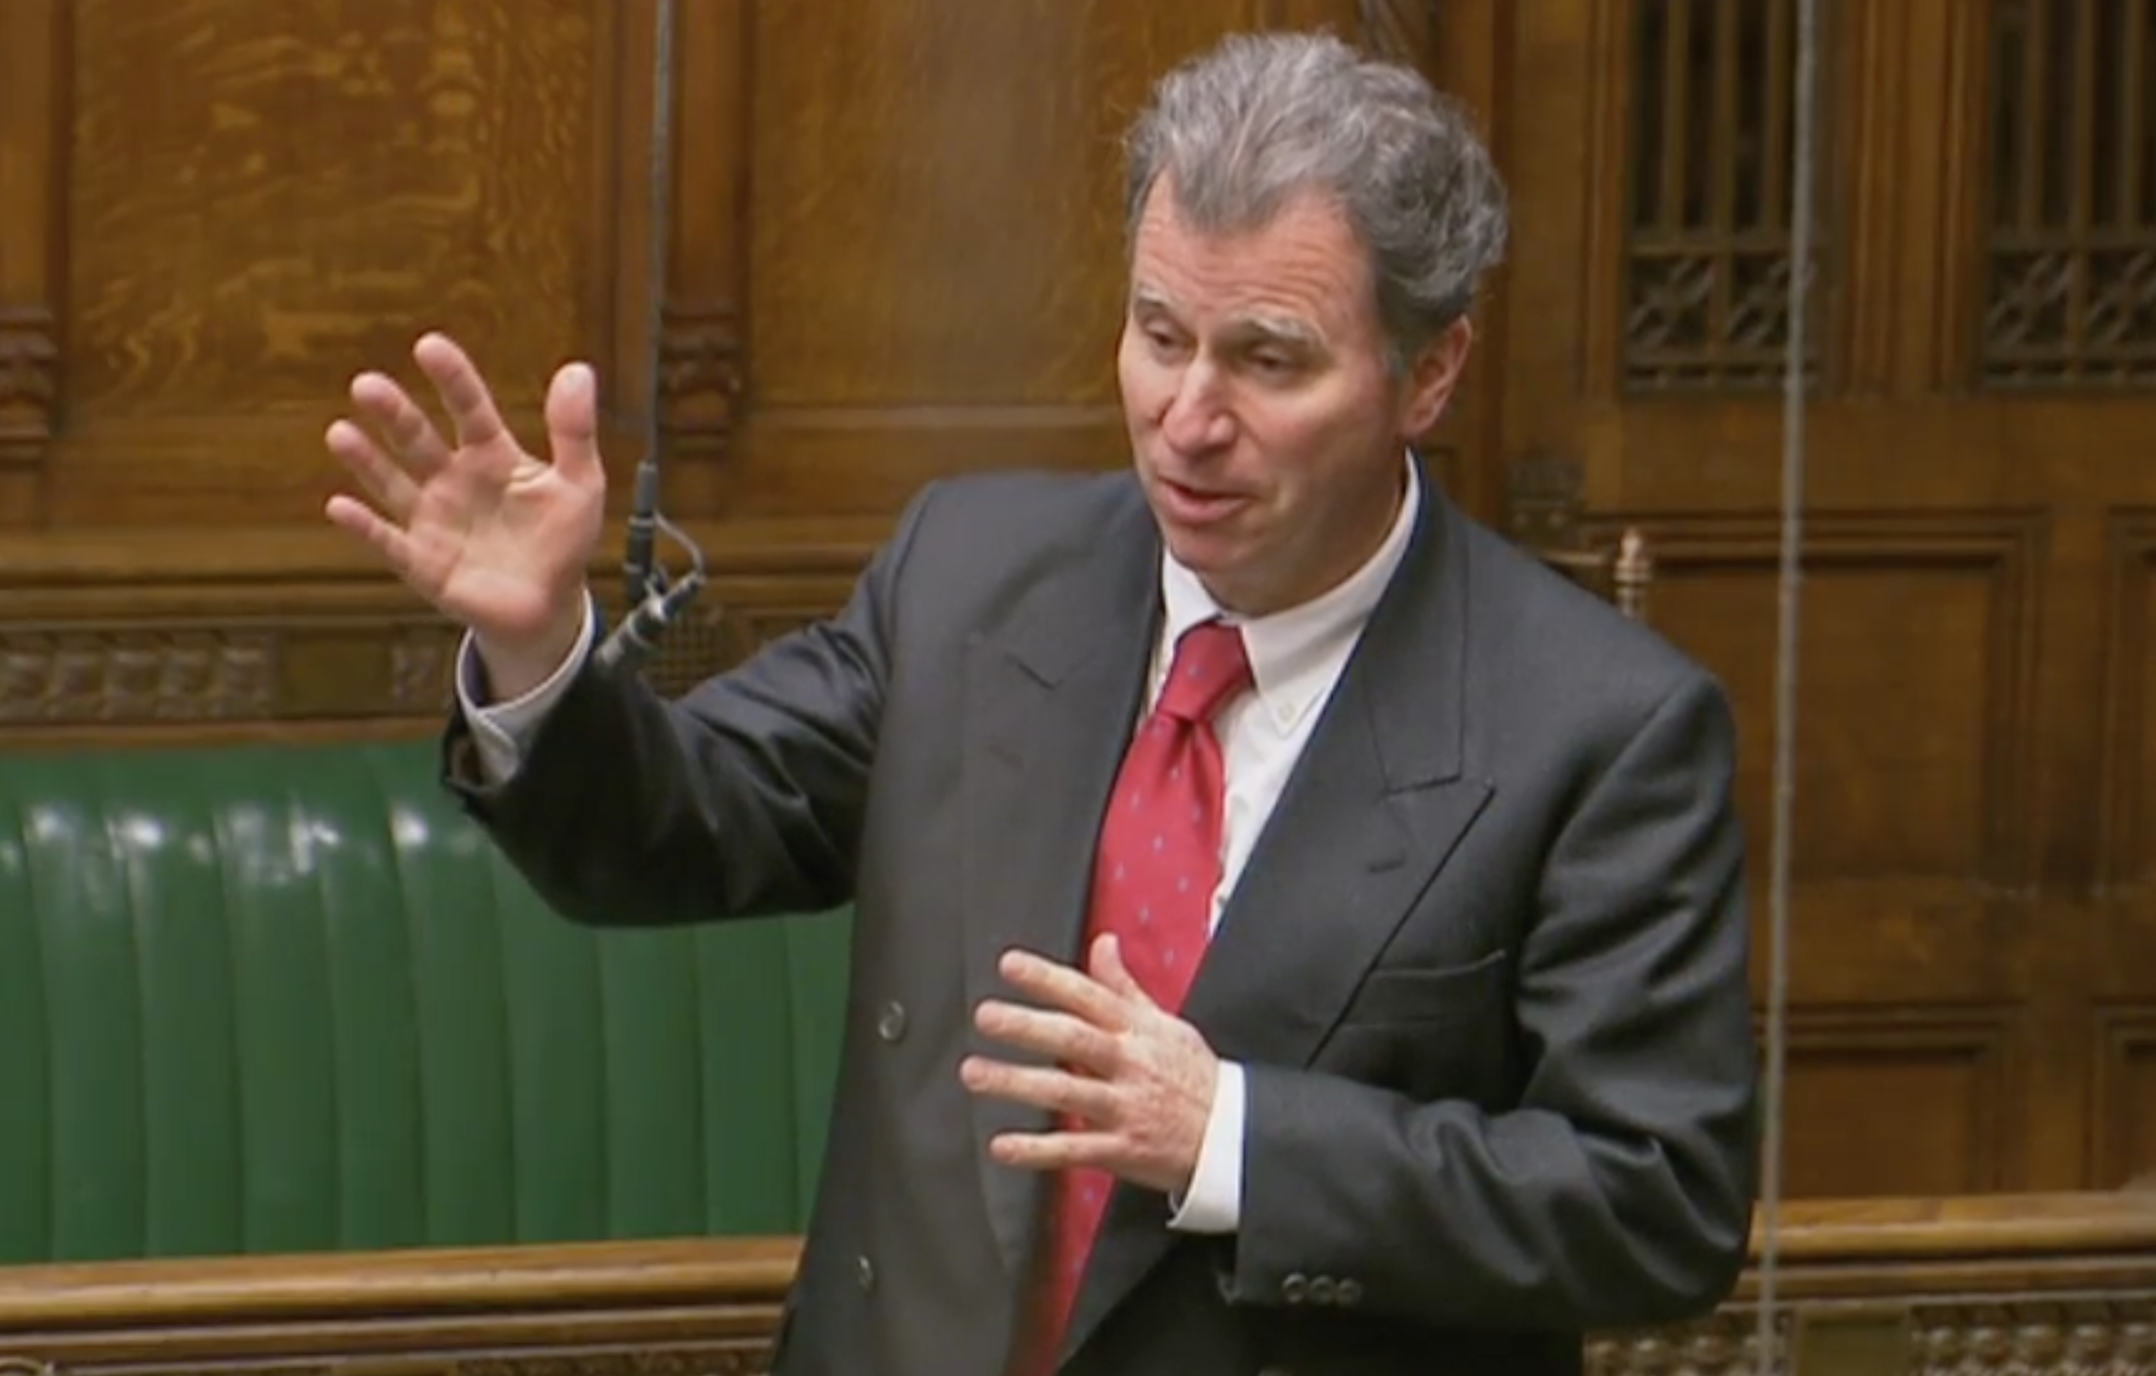 Oliver Letwin’s unambiguous warning to the Lords was in line with previous Government and right-wing press rhetoric about ‘the will of the people’